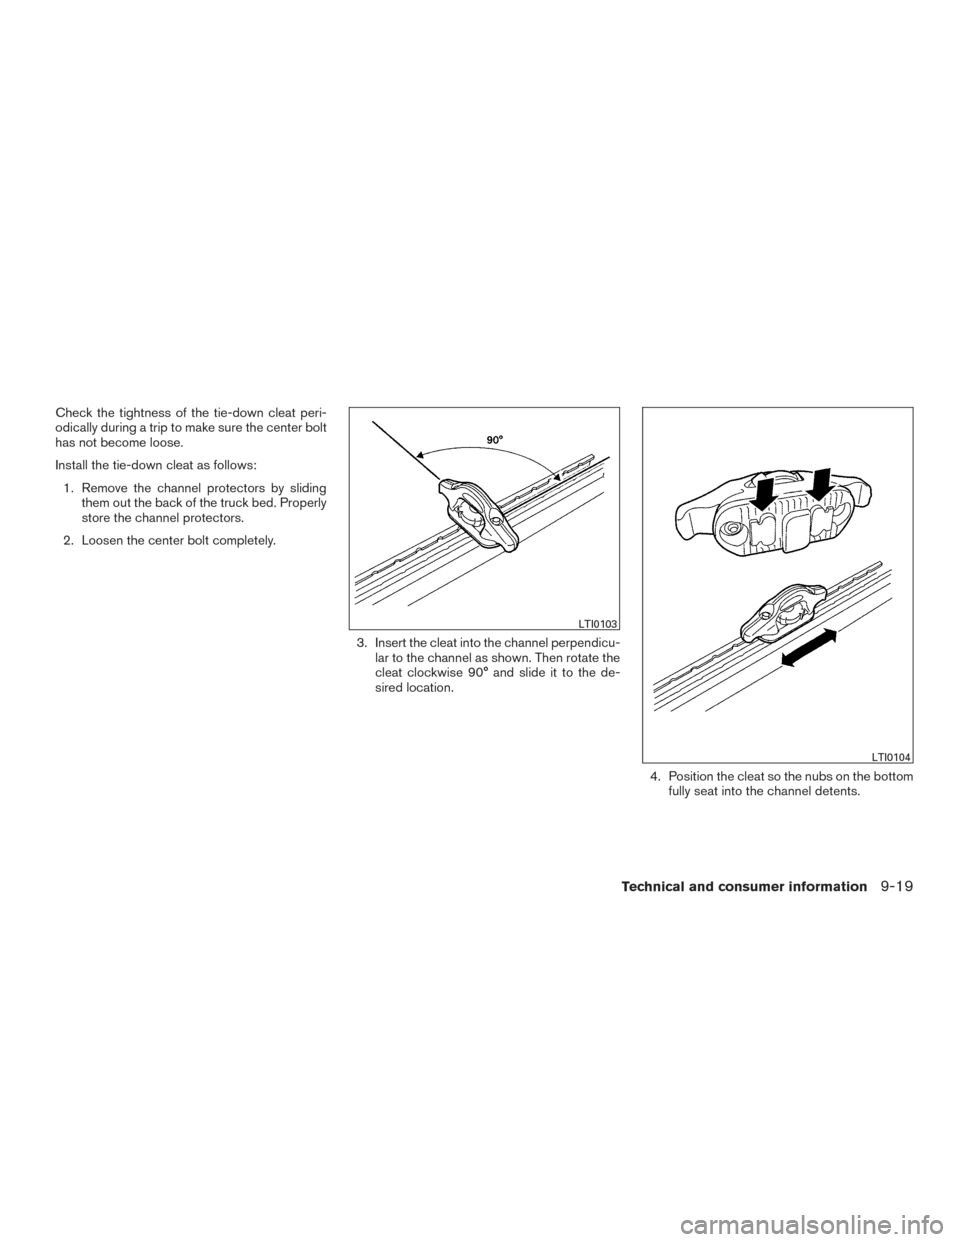 NISSAN TITAN 2015 1.G Owners Manual Check the tightness of the tie-down cleat peri-
odically during a trip to make sure the center bolt
has not become loose.
Install the tie-down cleat as follows:1. Remove the channel protectors by slid